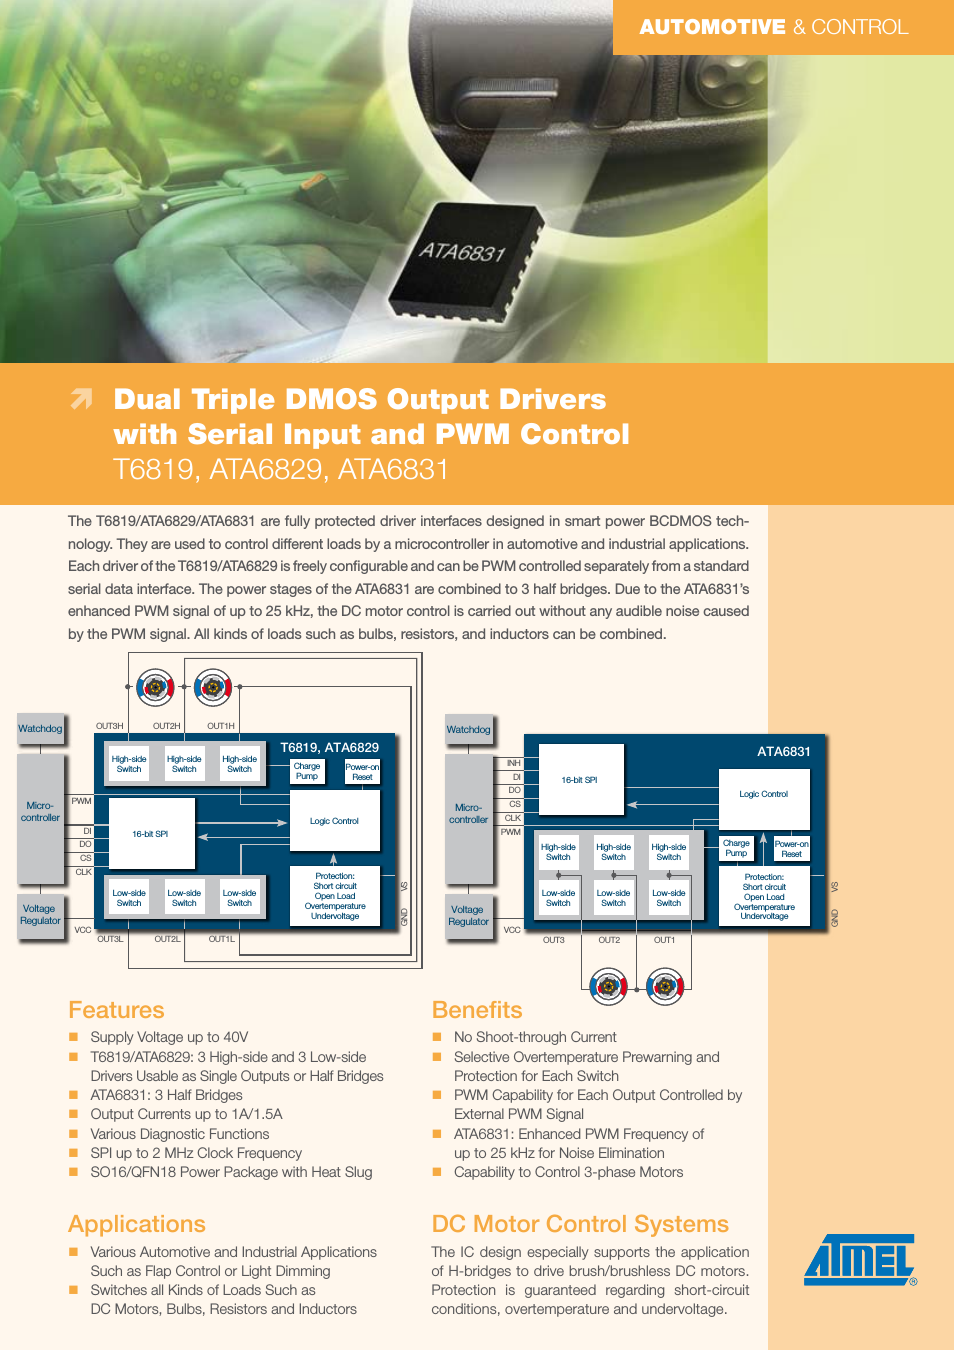 Dual Triple DMOS Output Drivers with Serial Input and PWM Control ATA6829